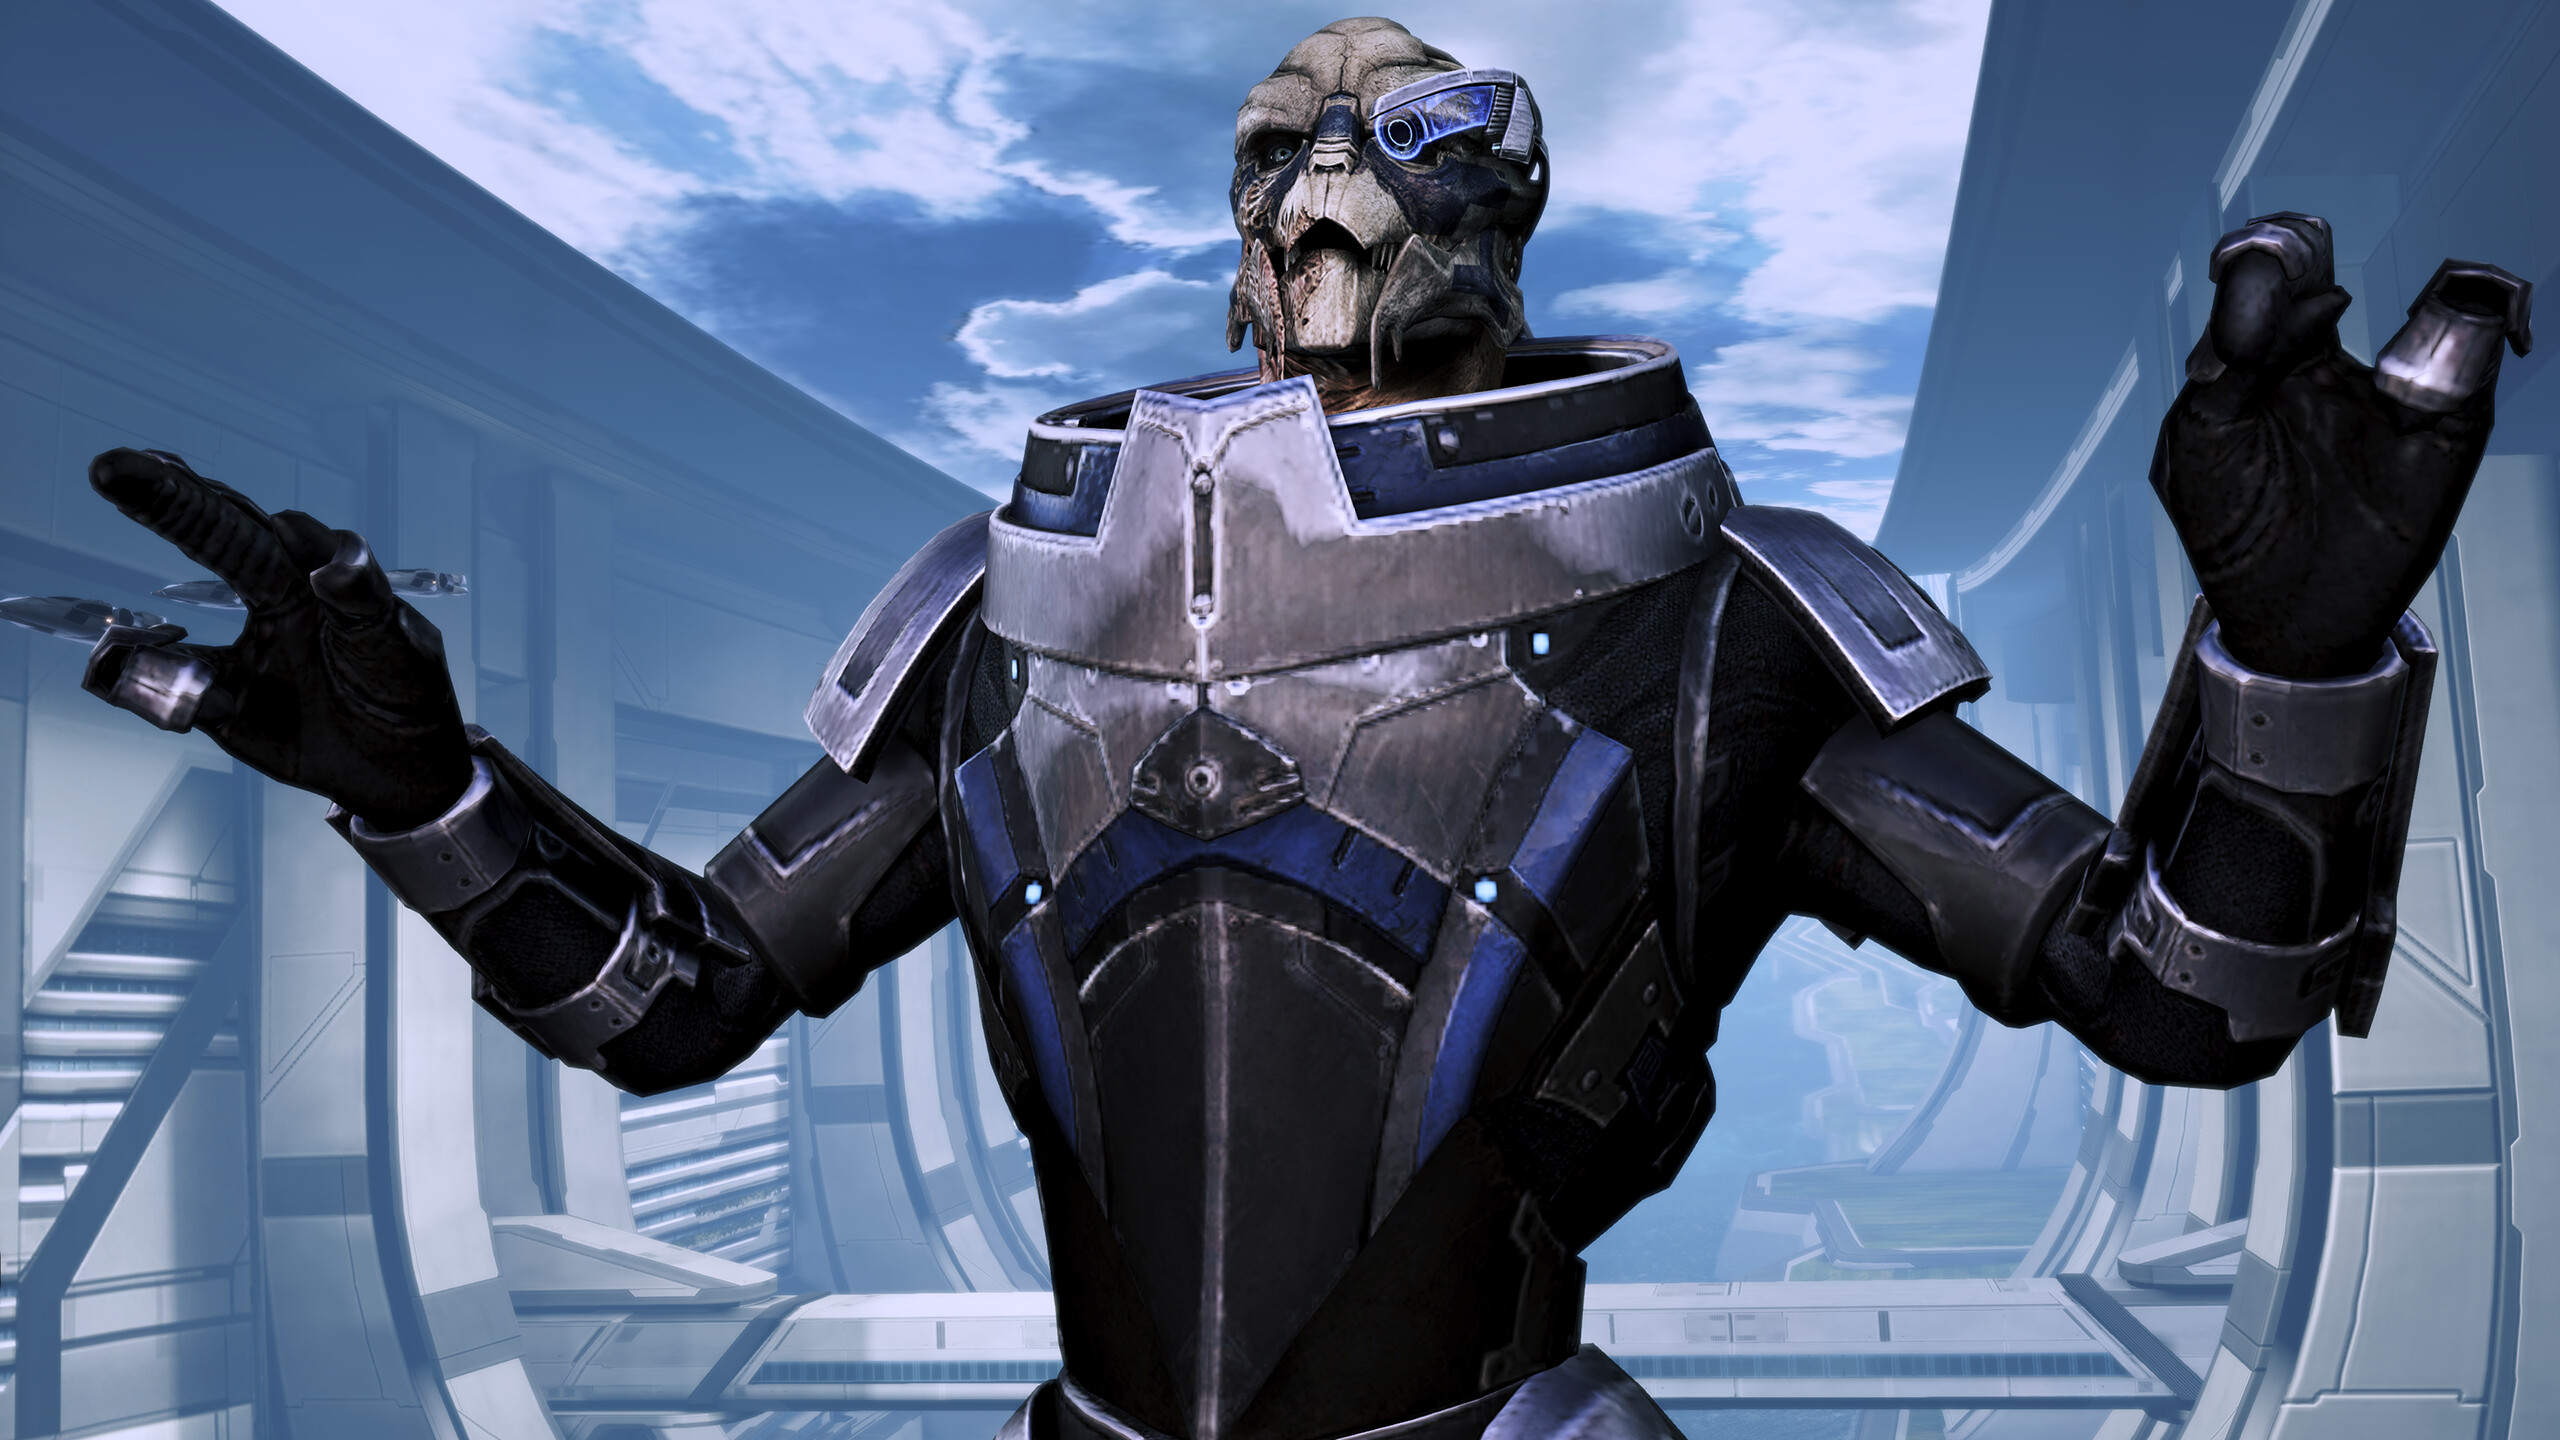 Garrus Vakarian: "I am Garrus Vakarian and this is now my favorite spot on the citadel" - the moment in Mass Effect 3 video game. 2560x1440 HD Wallpaper.